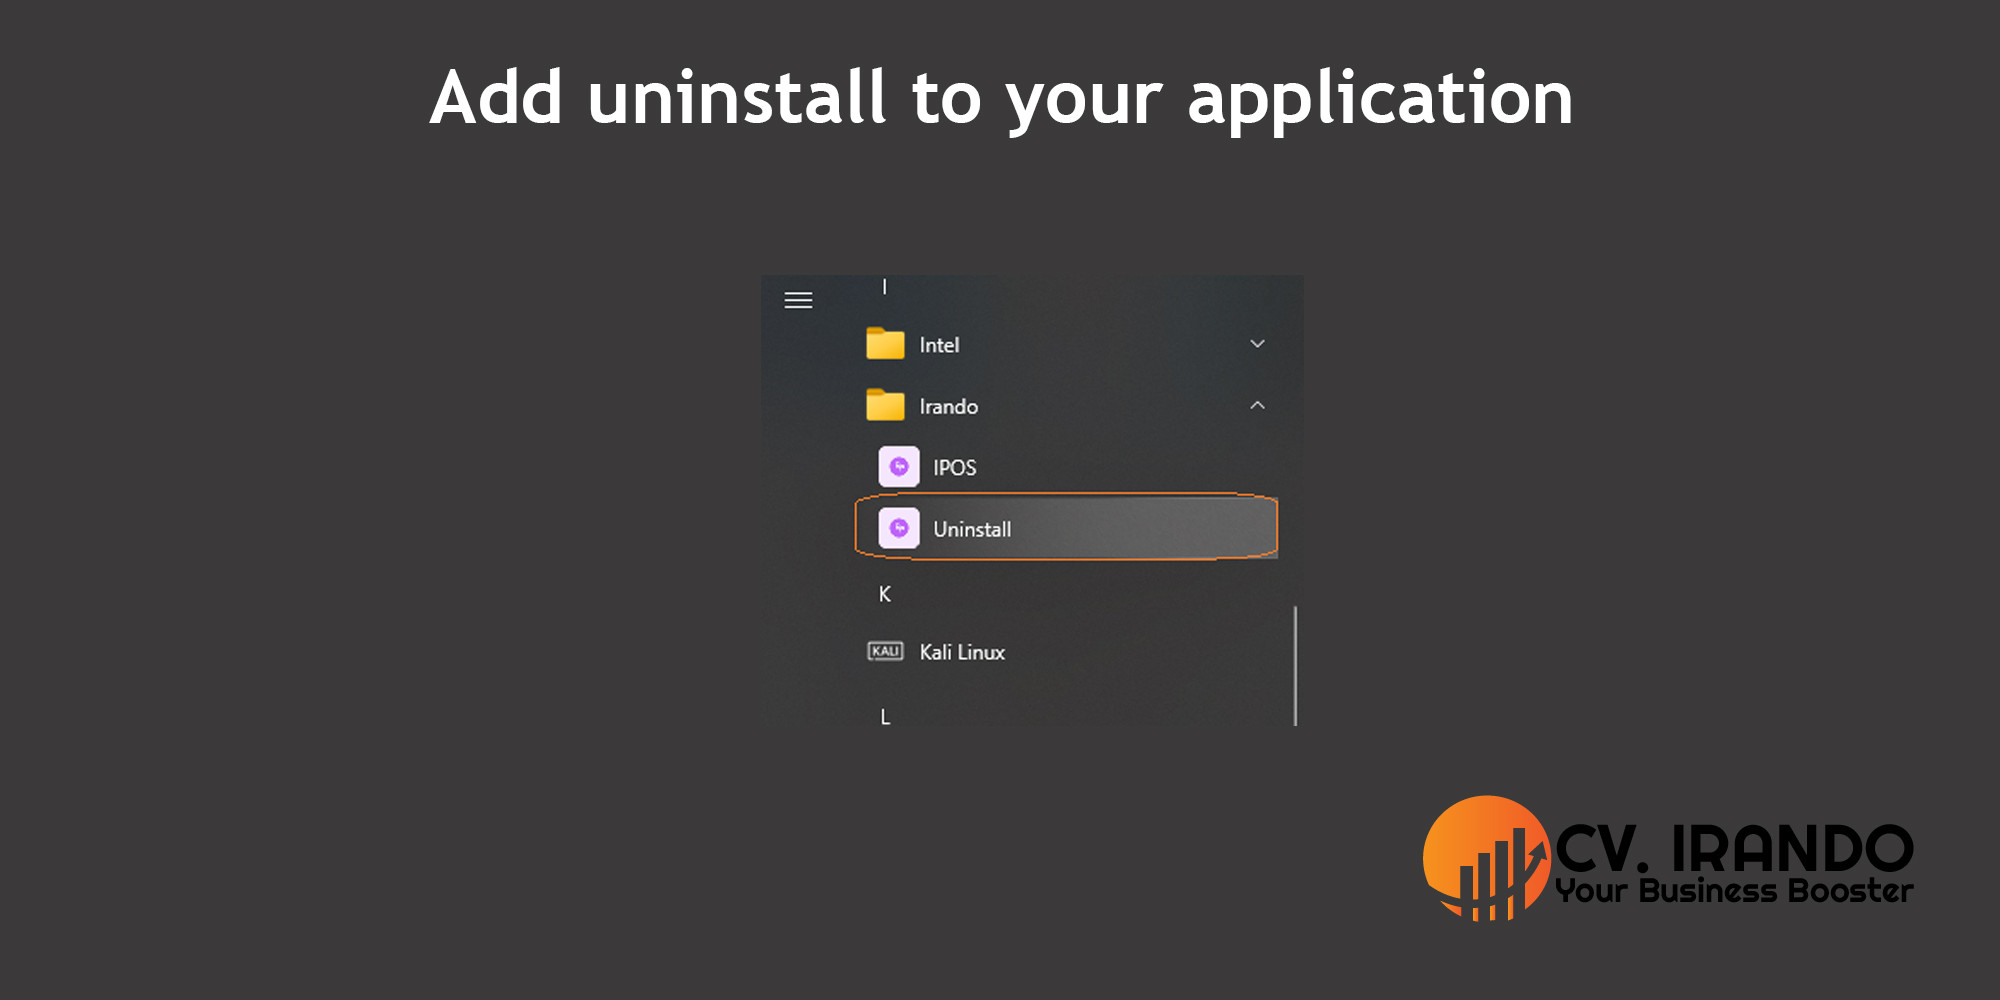 Add uninstall to your windows application